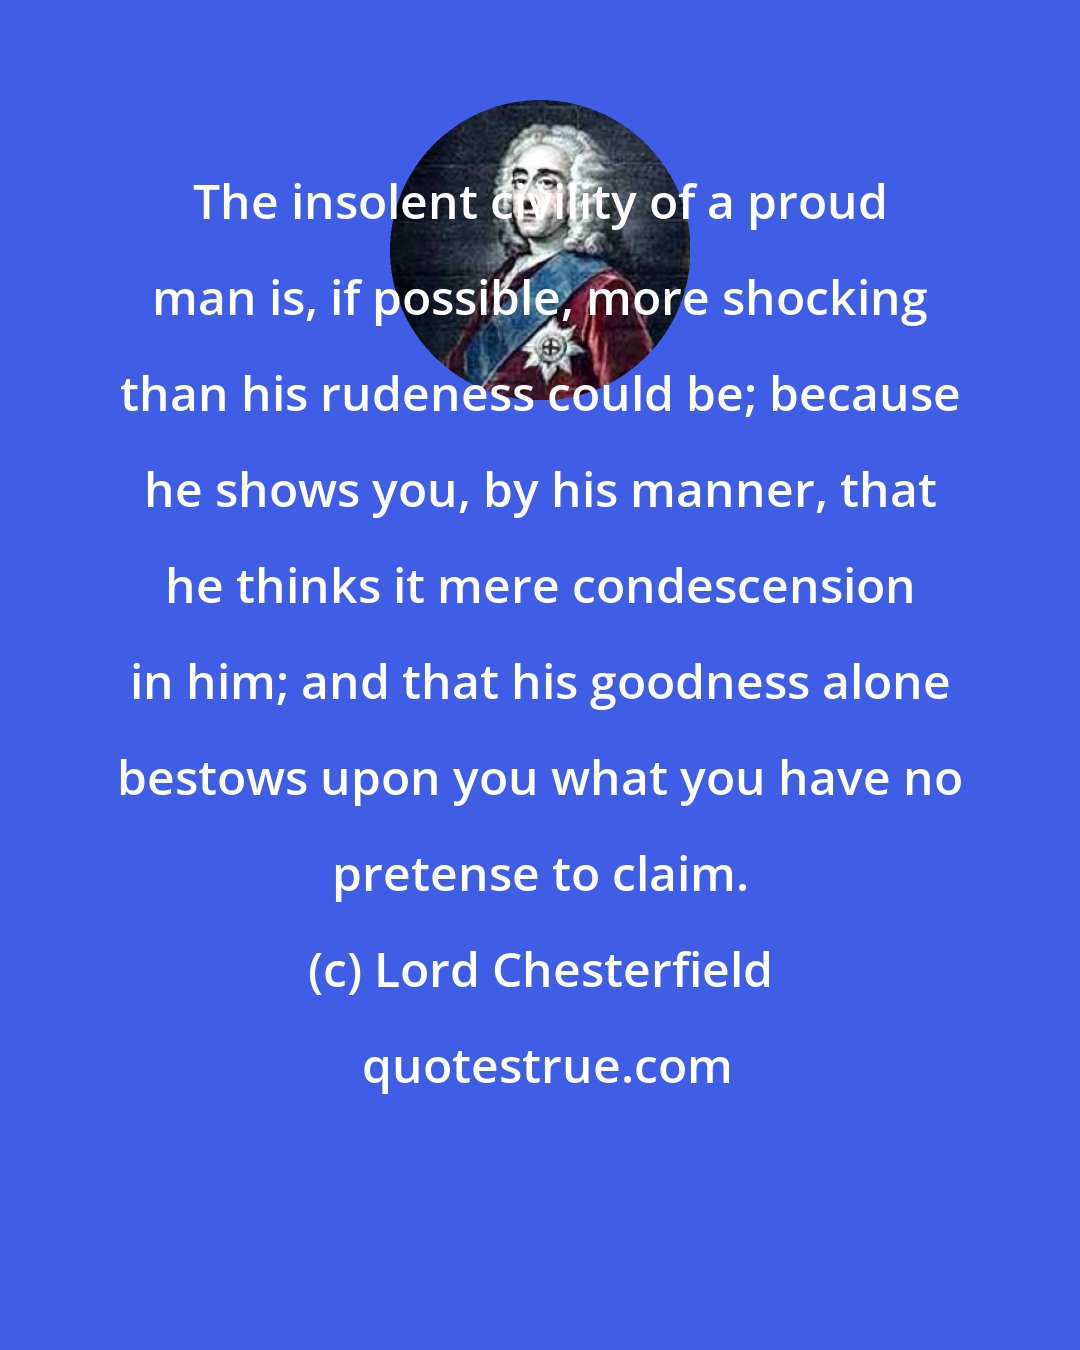 Lord Chesterfield: The insolent civility of a proud man is, if possible, more shocking than his rudeness could be; because he shows you, by his manner, that he thinks it mere condescension in him; and that his goodness alone bestows upon you what you have no pretense to claim.